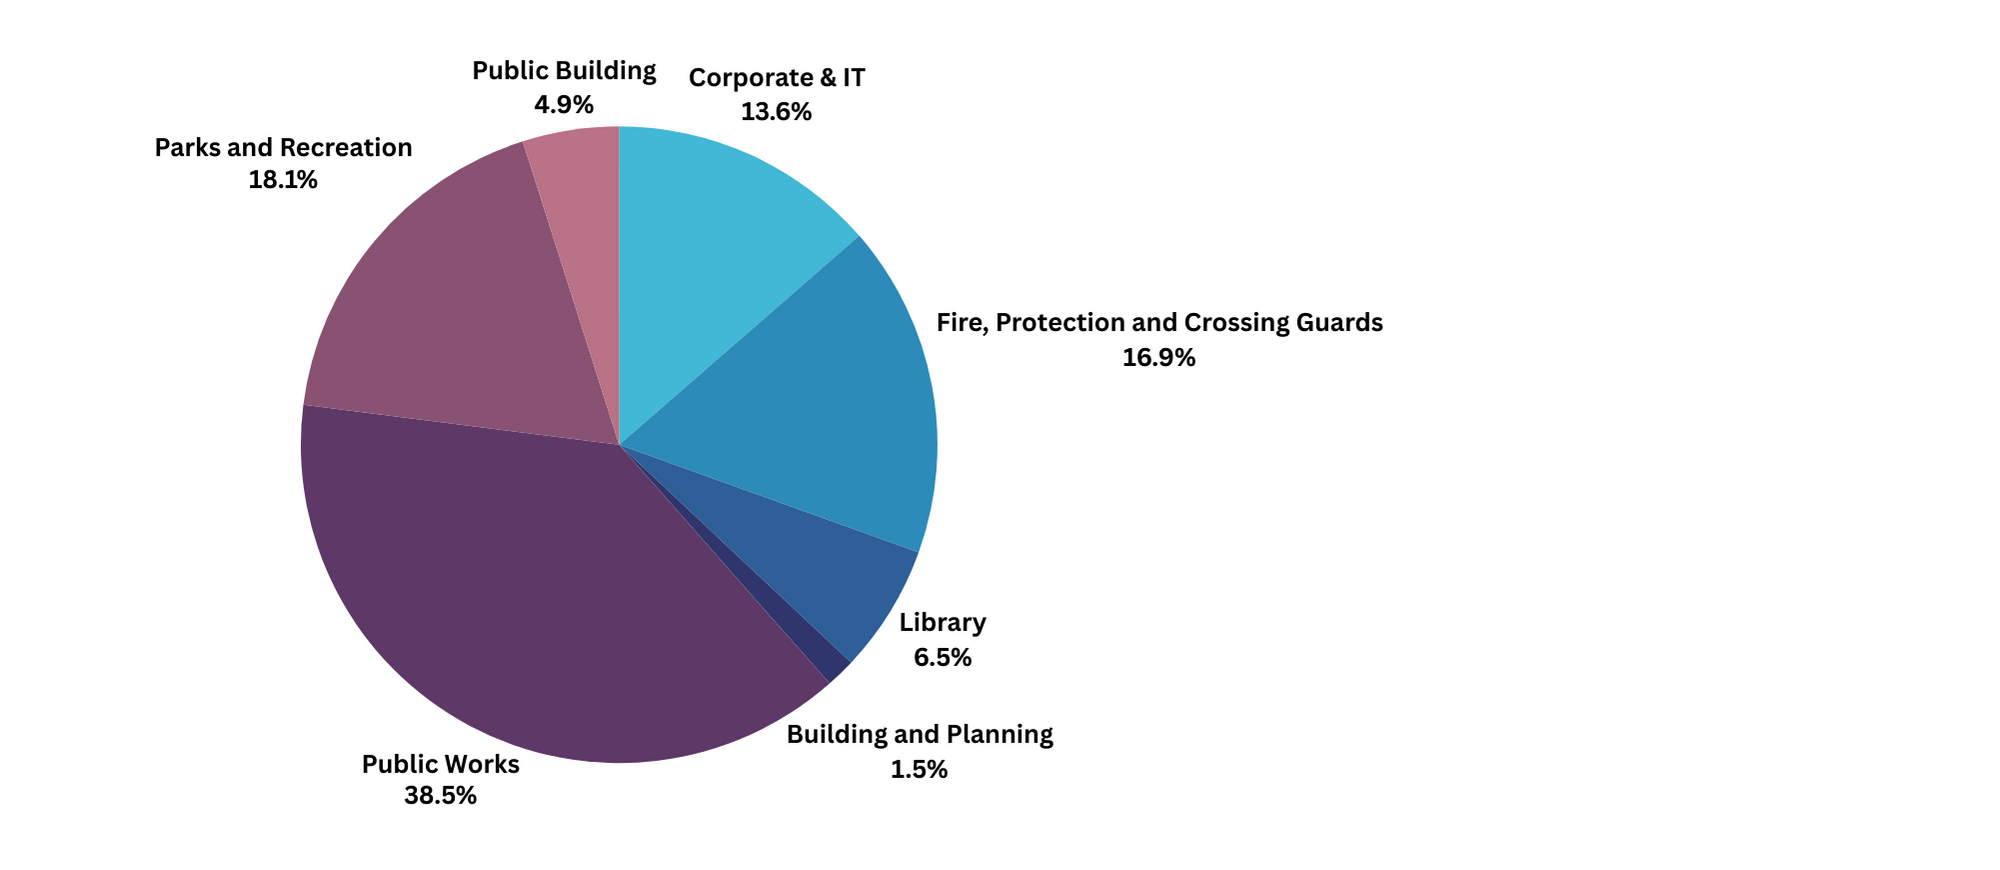 Pie chart breaking down total taxy levy requirements for 2024 Planning and Building                                            1.5% Corporate & IT                                                       13.6% Fire, Protection and Crossing Guards                  16.9% Library                                                                      6.5% Public Works                                                          38.5% Parks and Recreation                                            18.1% Public Buildings                                                     4.9%